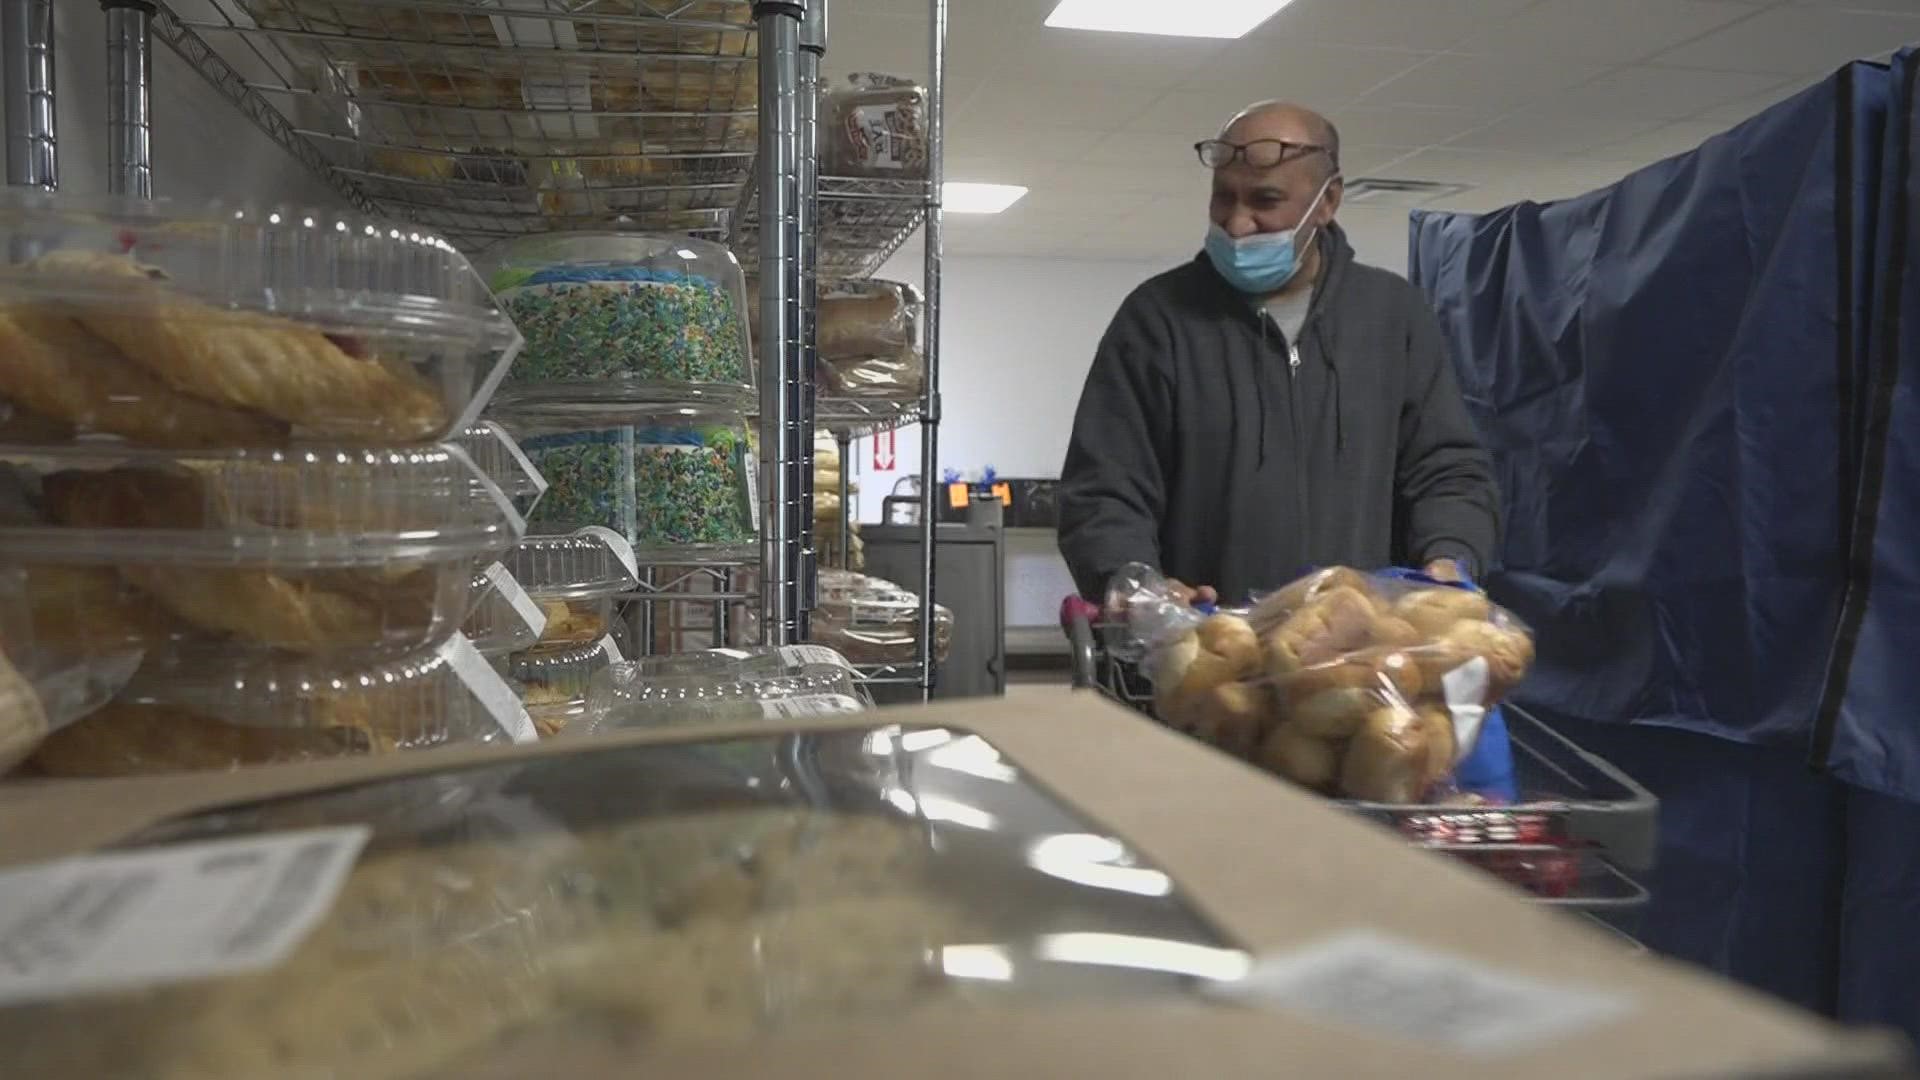 The Augusta Food Bank serves an important role in its community and offers free food on Thursdays to those who need it.